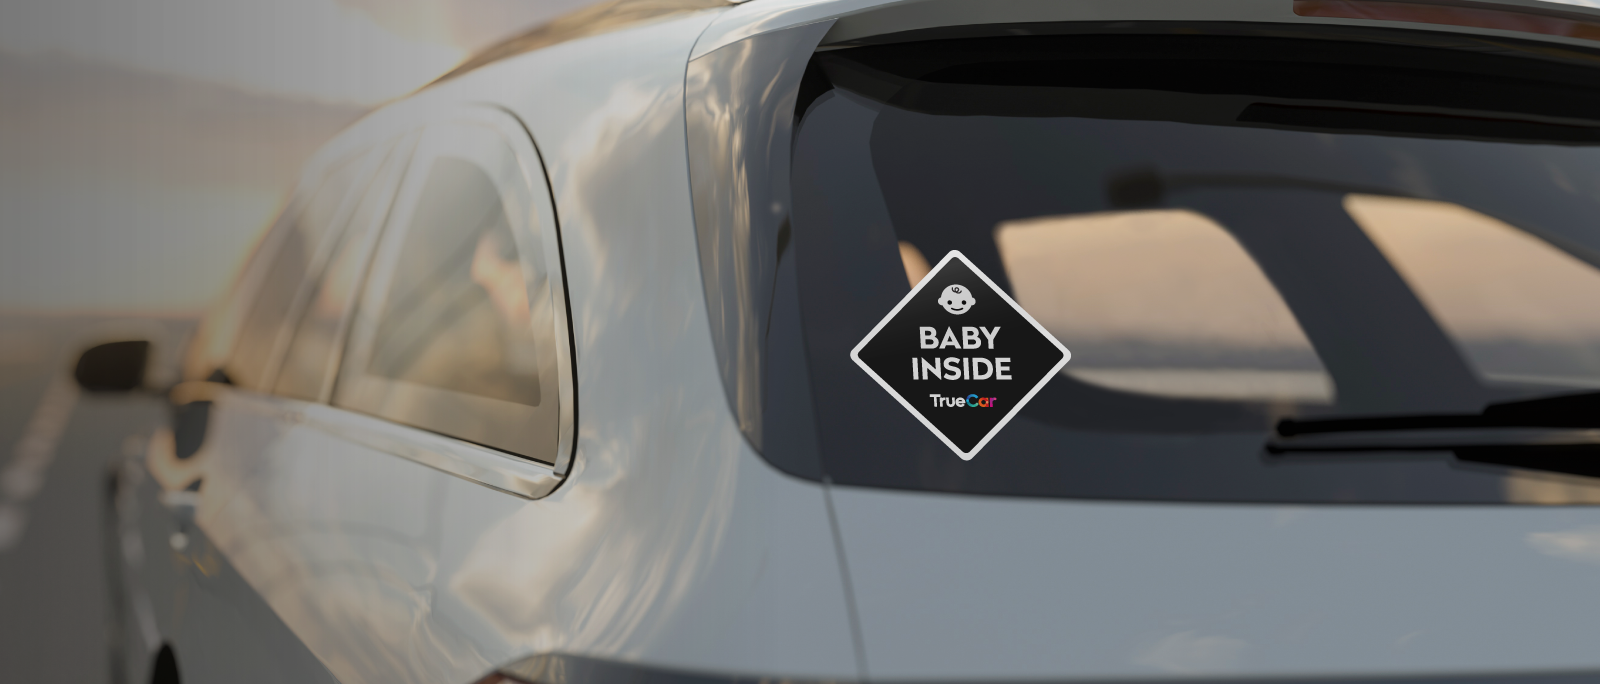 Free Baby Inside Car Decal